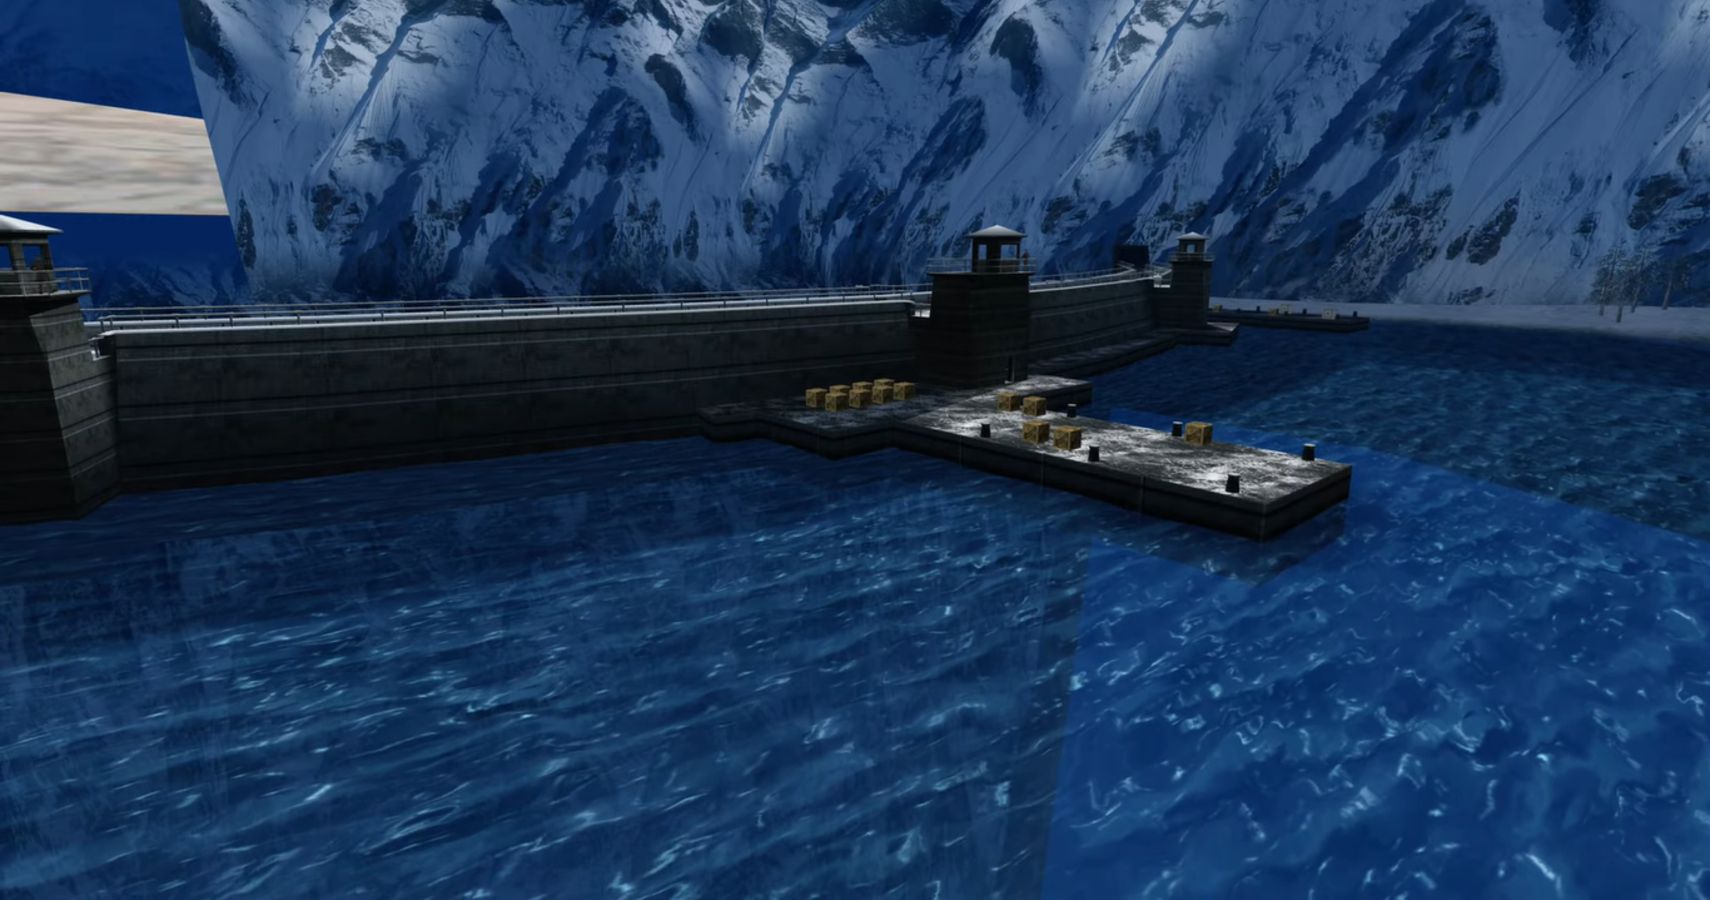 Full playthrough of cancelled Xbox 360 GoldenEye remake has leaked